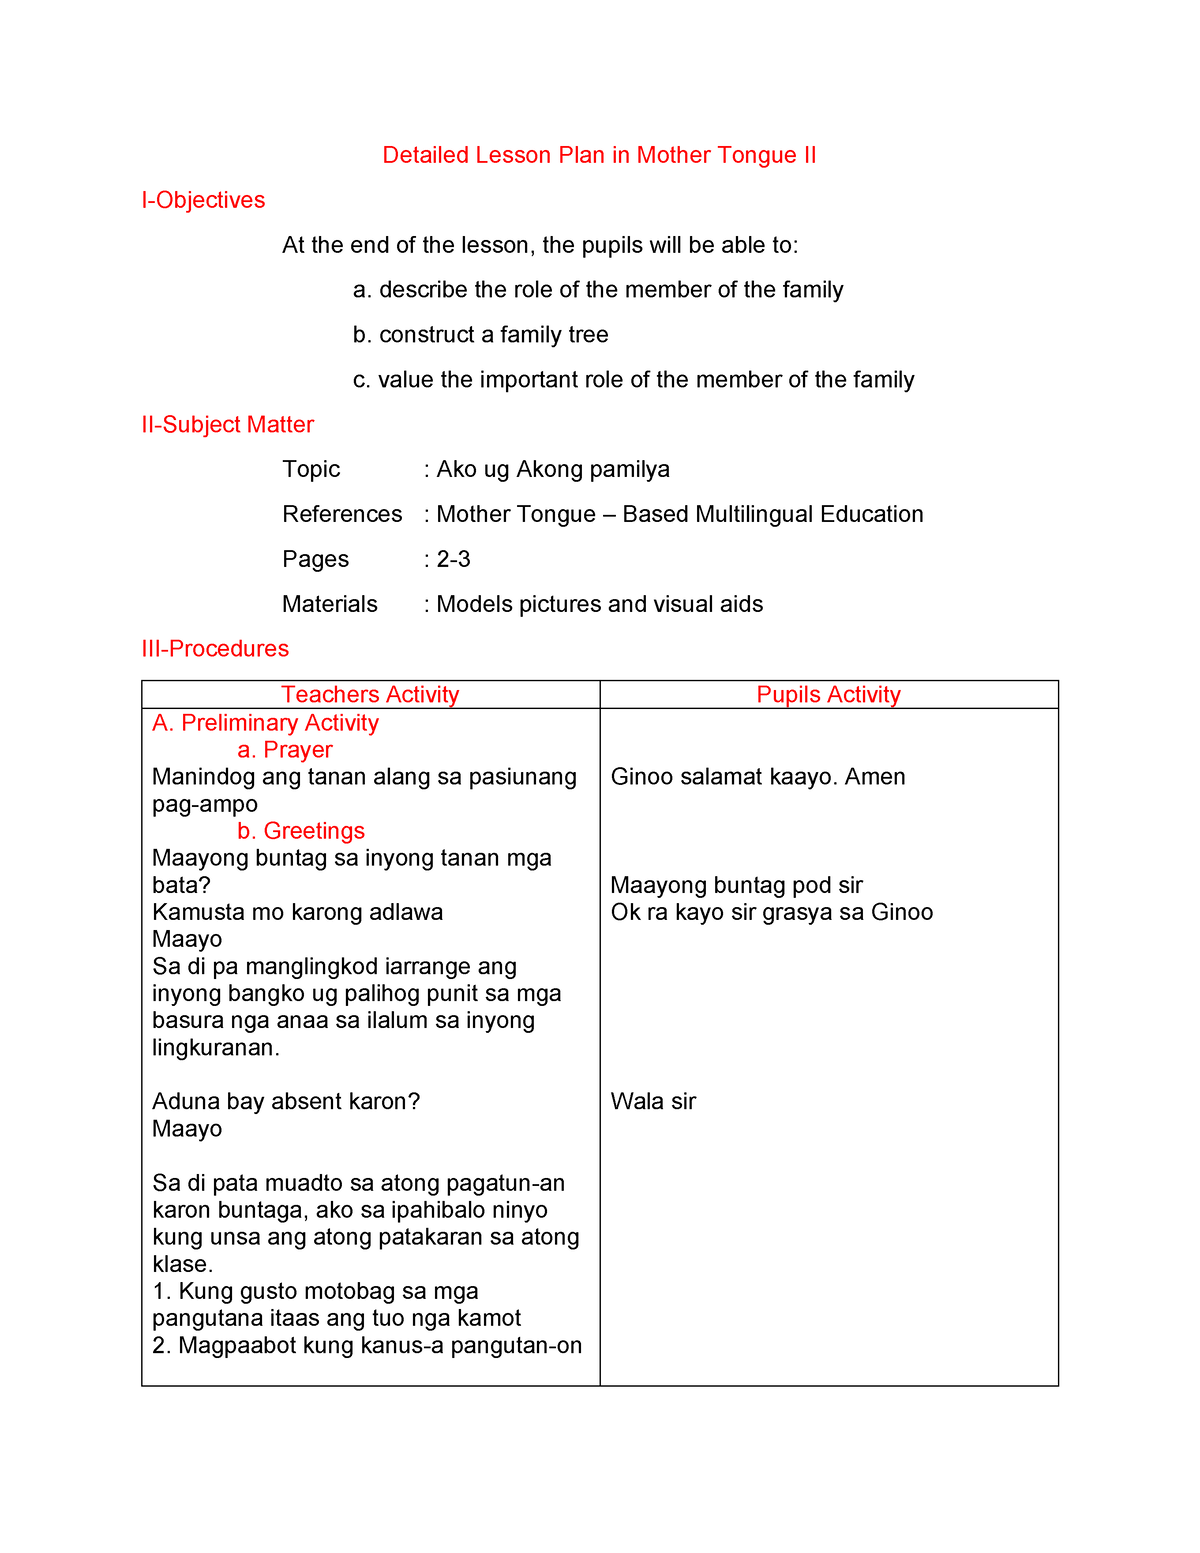 MTB-MLE 3 LESSON PLAN - Detailed Lesson Plan in Mother Tongue II I